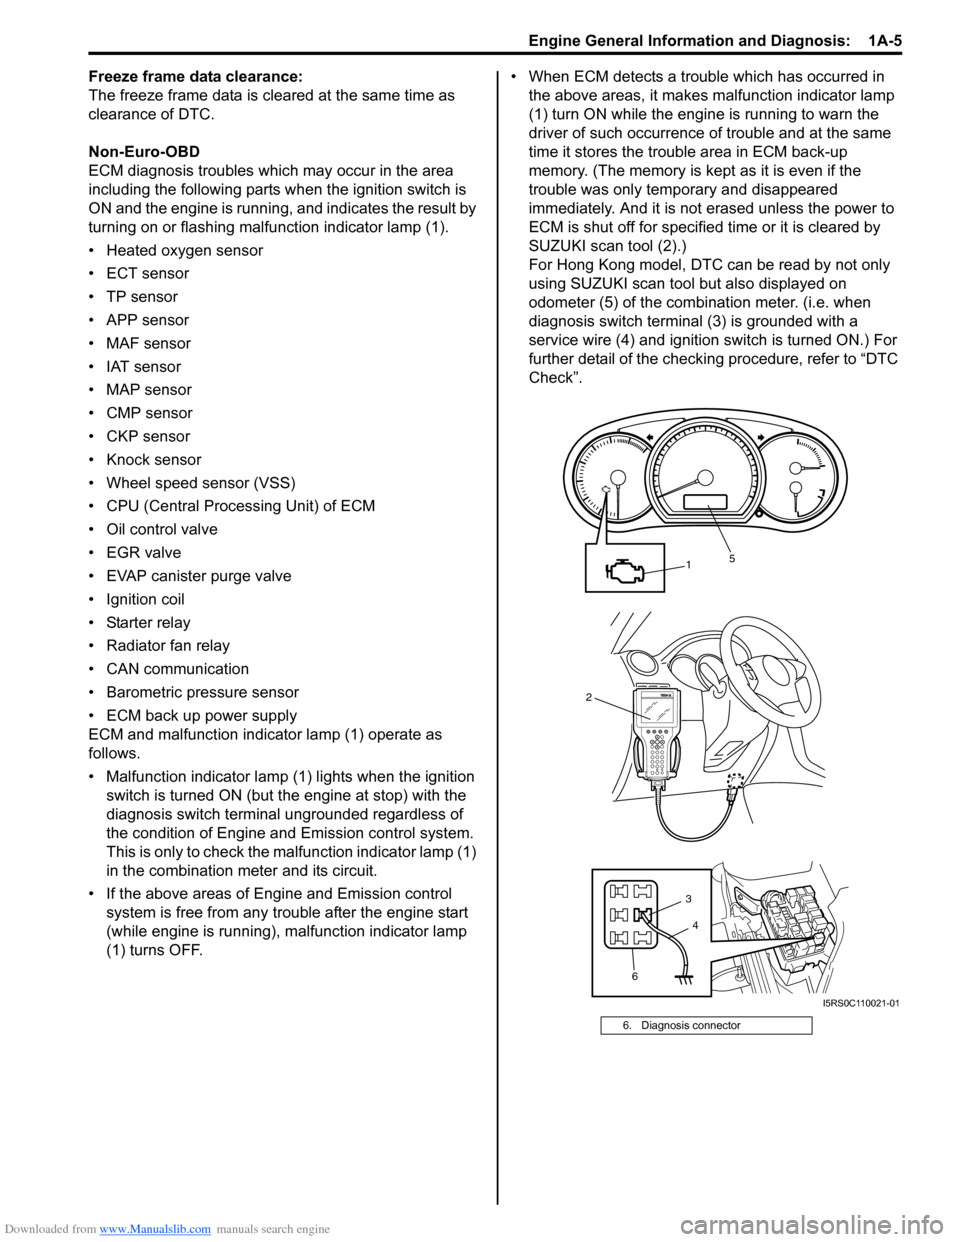 SUZUKI SWIFT 2008 2.G Service Workshop Manual Downloaded from www.Manualslib.com manuals search engine Engine General Information and Diagnosis:  1A-5
Freeze frame data clearance:
The freeze frame data is cleared at the same time as 
clearance of